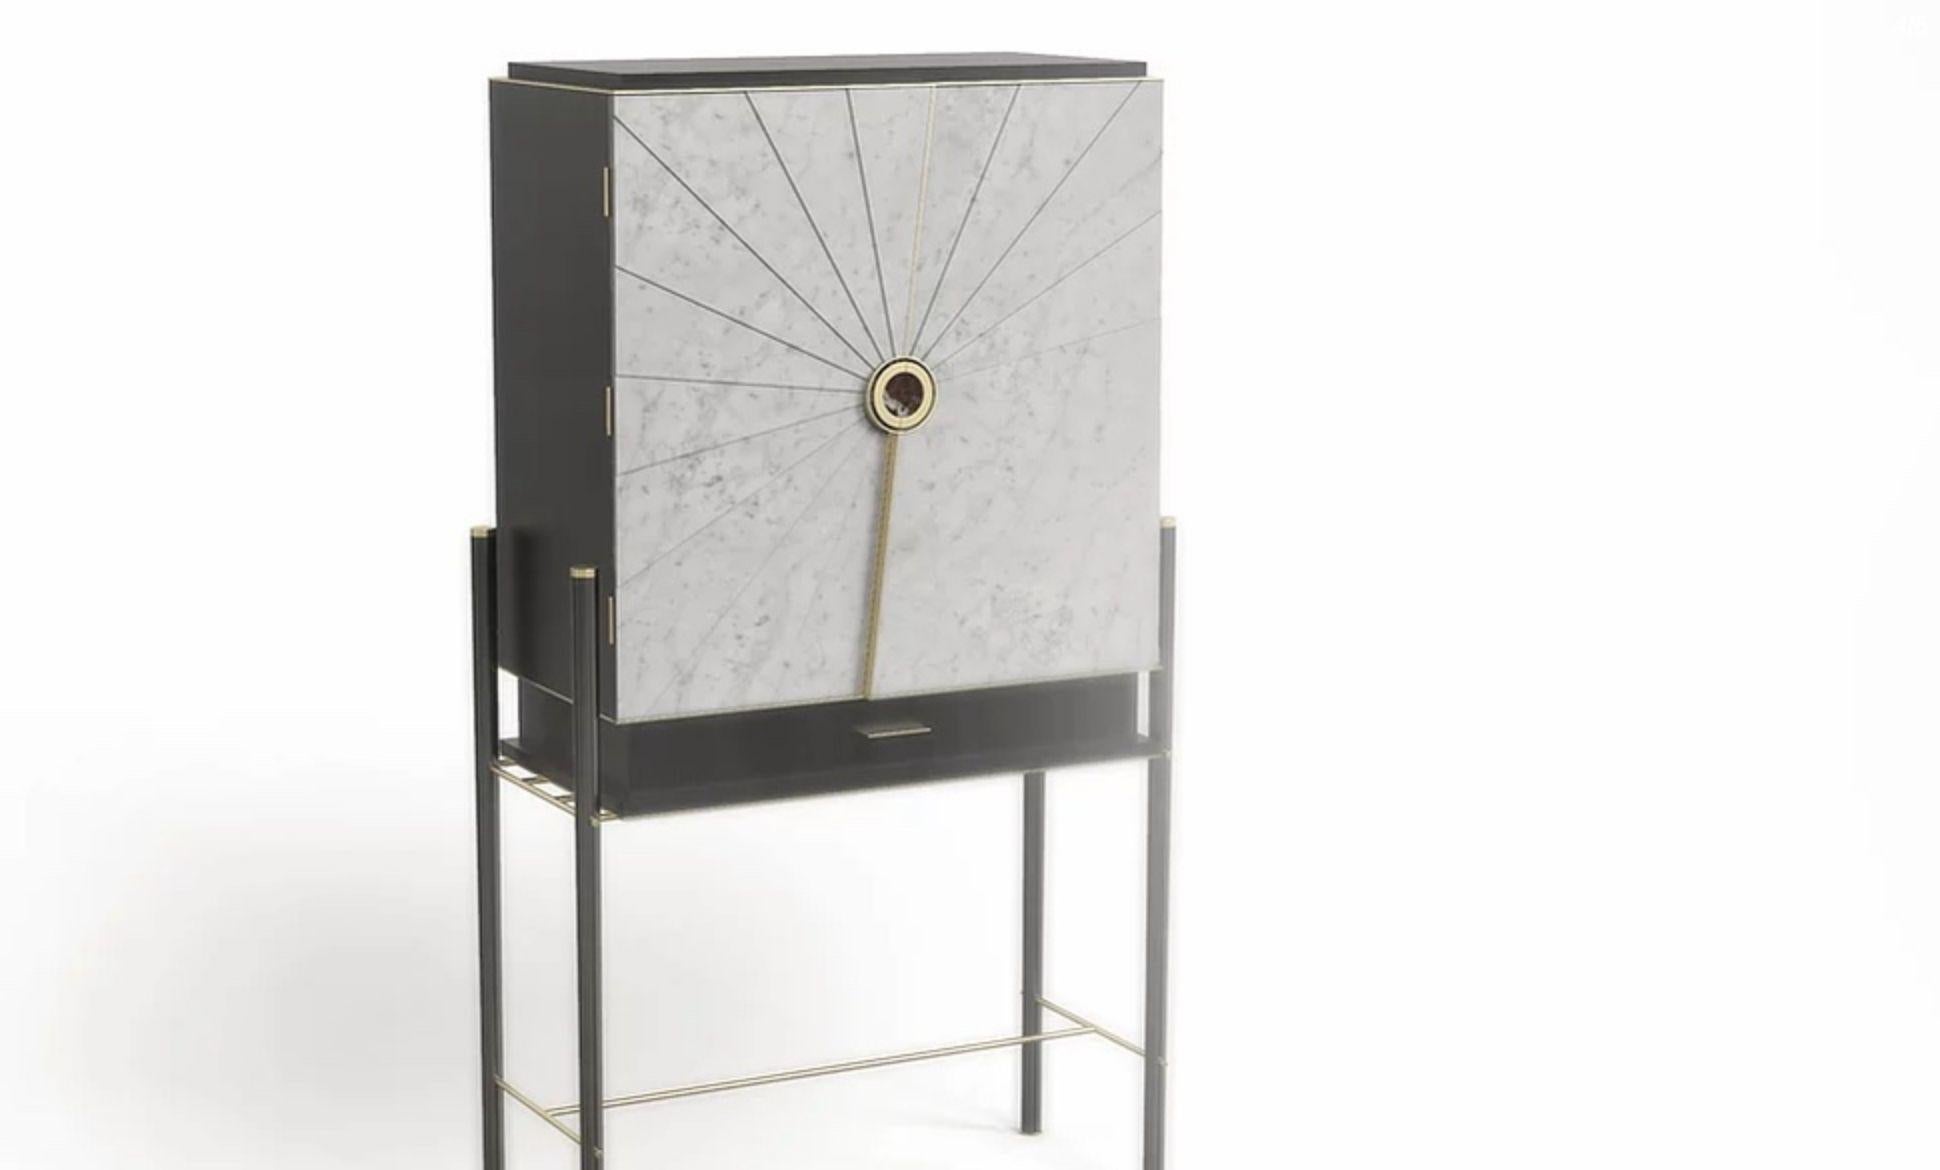 Vertigo cabinet by Marmi Serafini
Materials: Carrara C, Rosso Lepanto, Metal
Dimensions: D 42 x W 89 x H 160 cm

Vertigo is a detail oriented cabinet. The marble covering on the doors of the cabinet is shaped in such a way to create an hypnotic